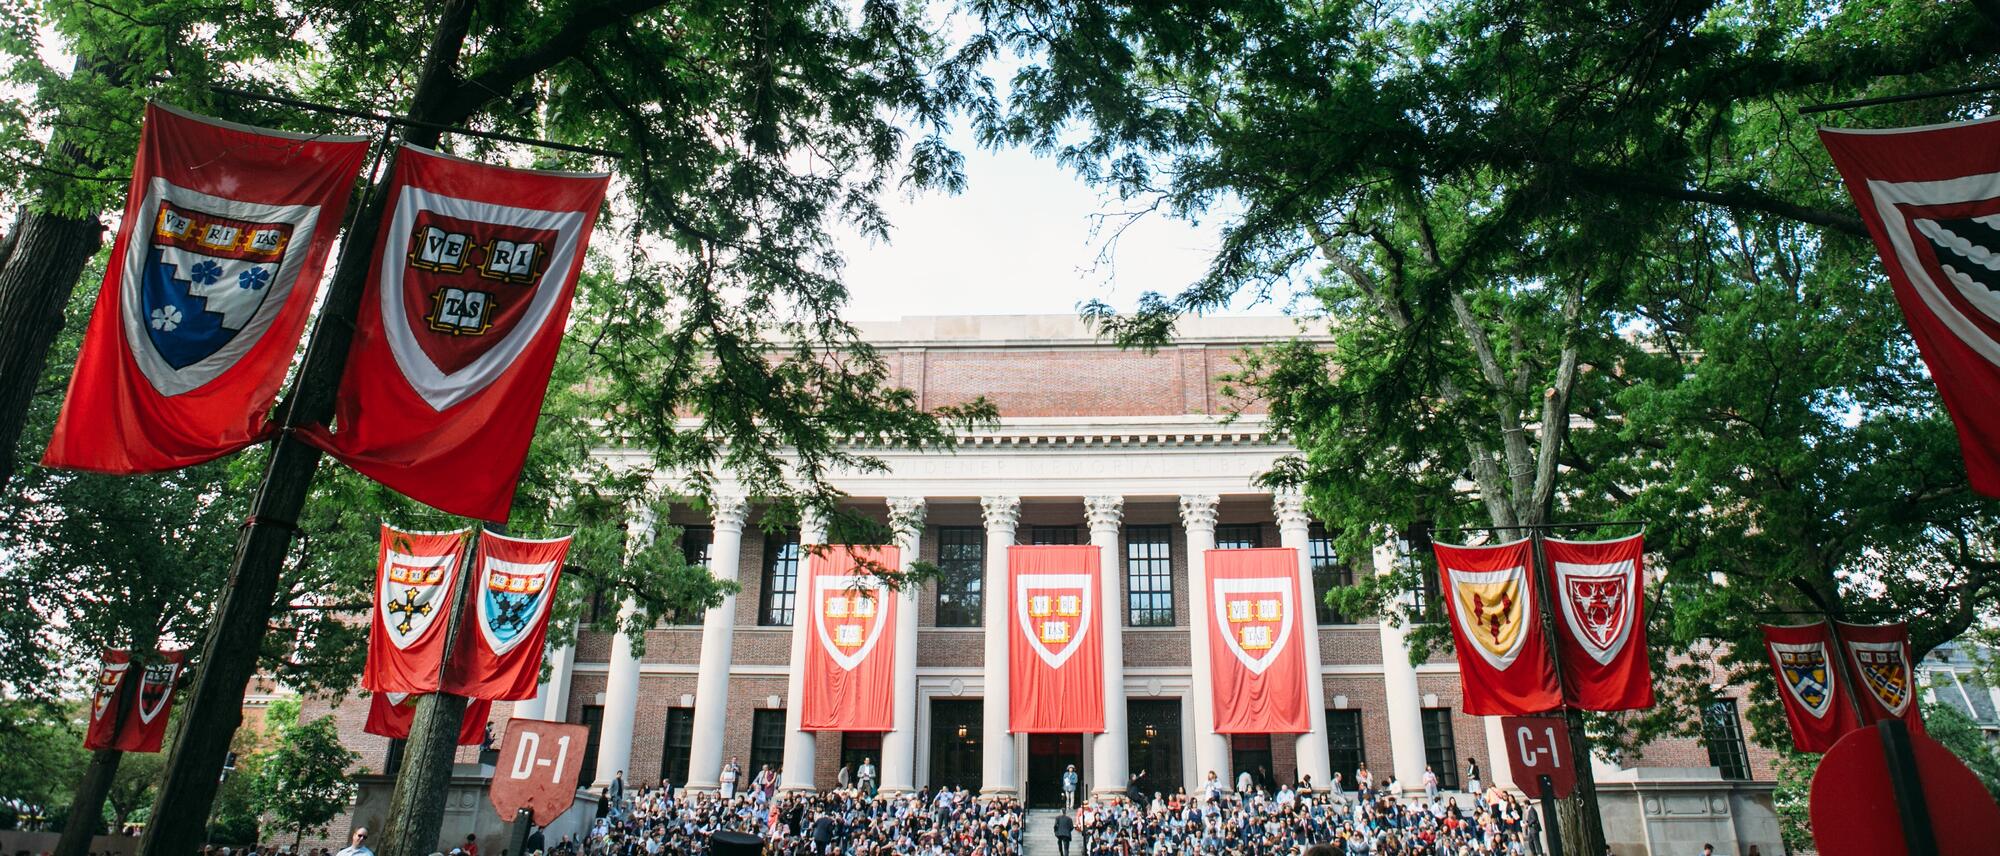 Commencement ceremony photo at Harvard. Several crimson banners with the Harvard shield logo in front can be seen on a building with columns.